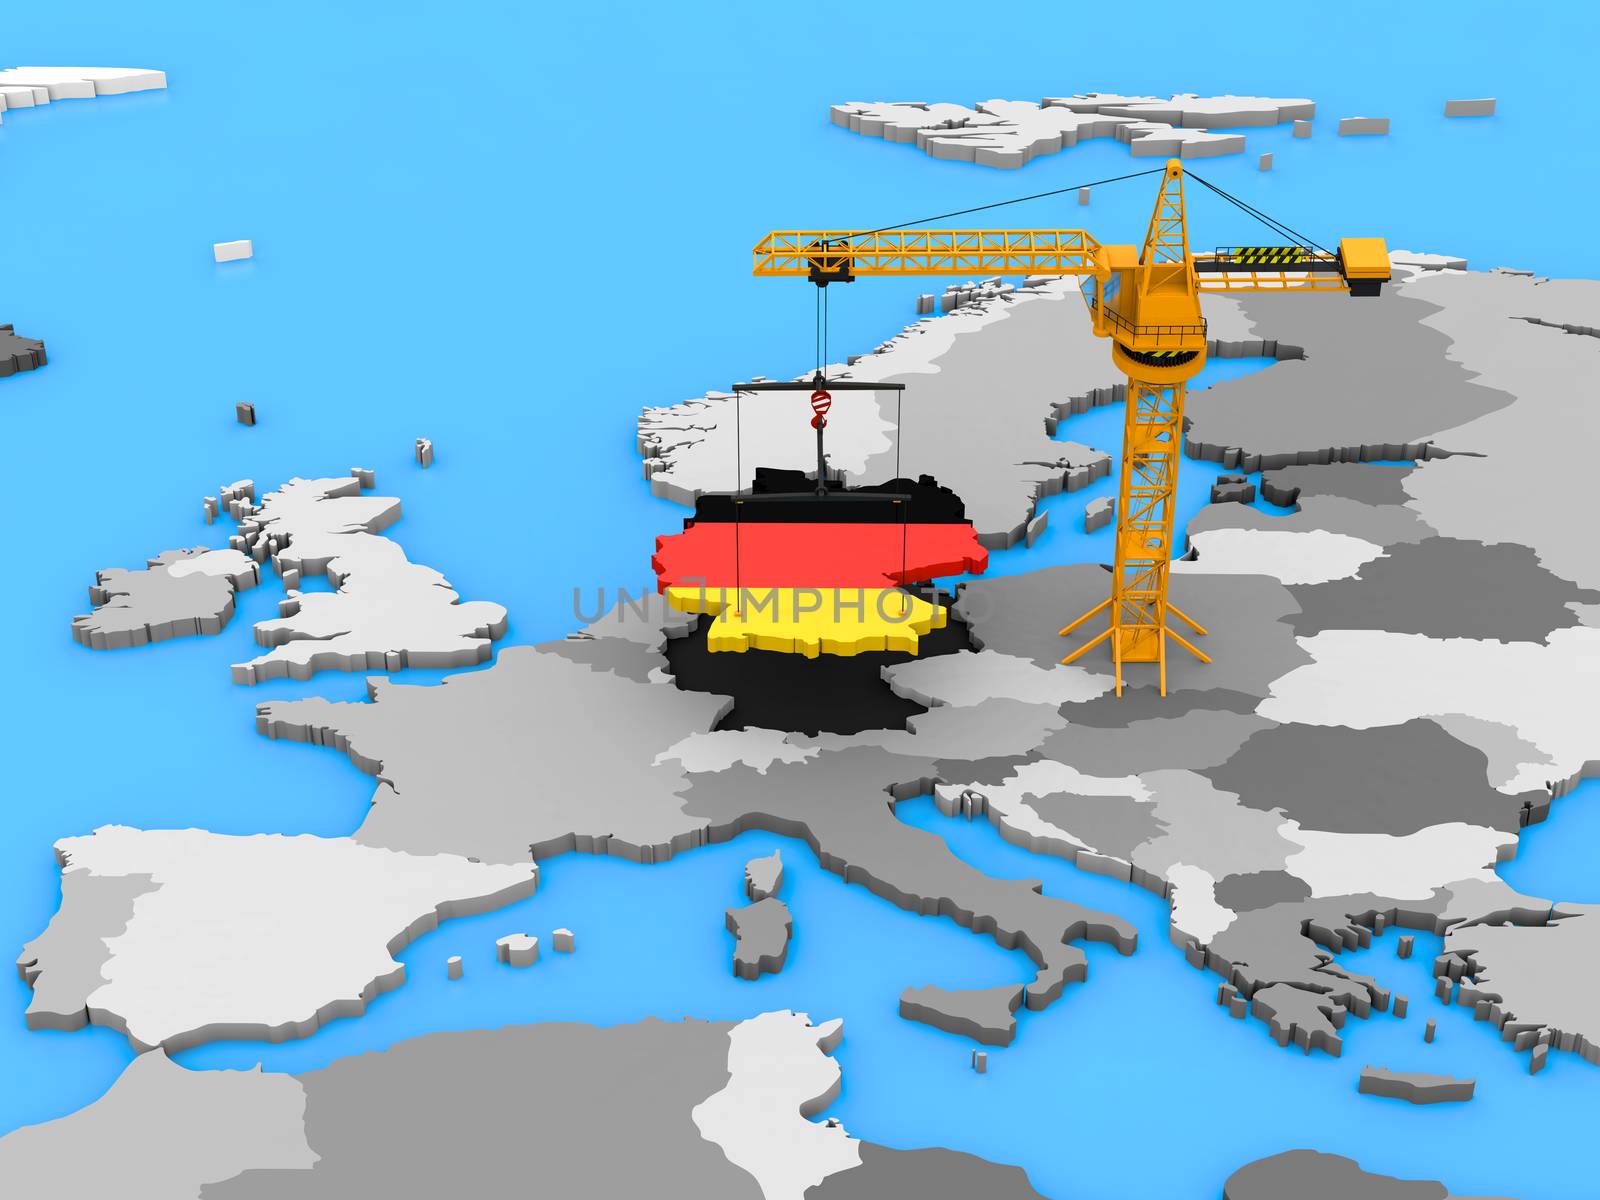 German flag in the shape of the country hanging on a crane over Europe